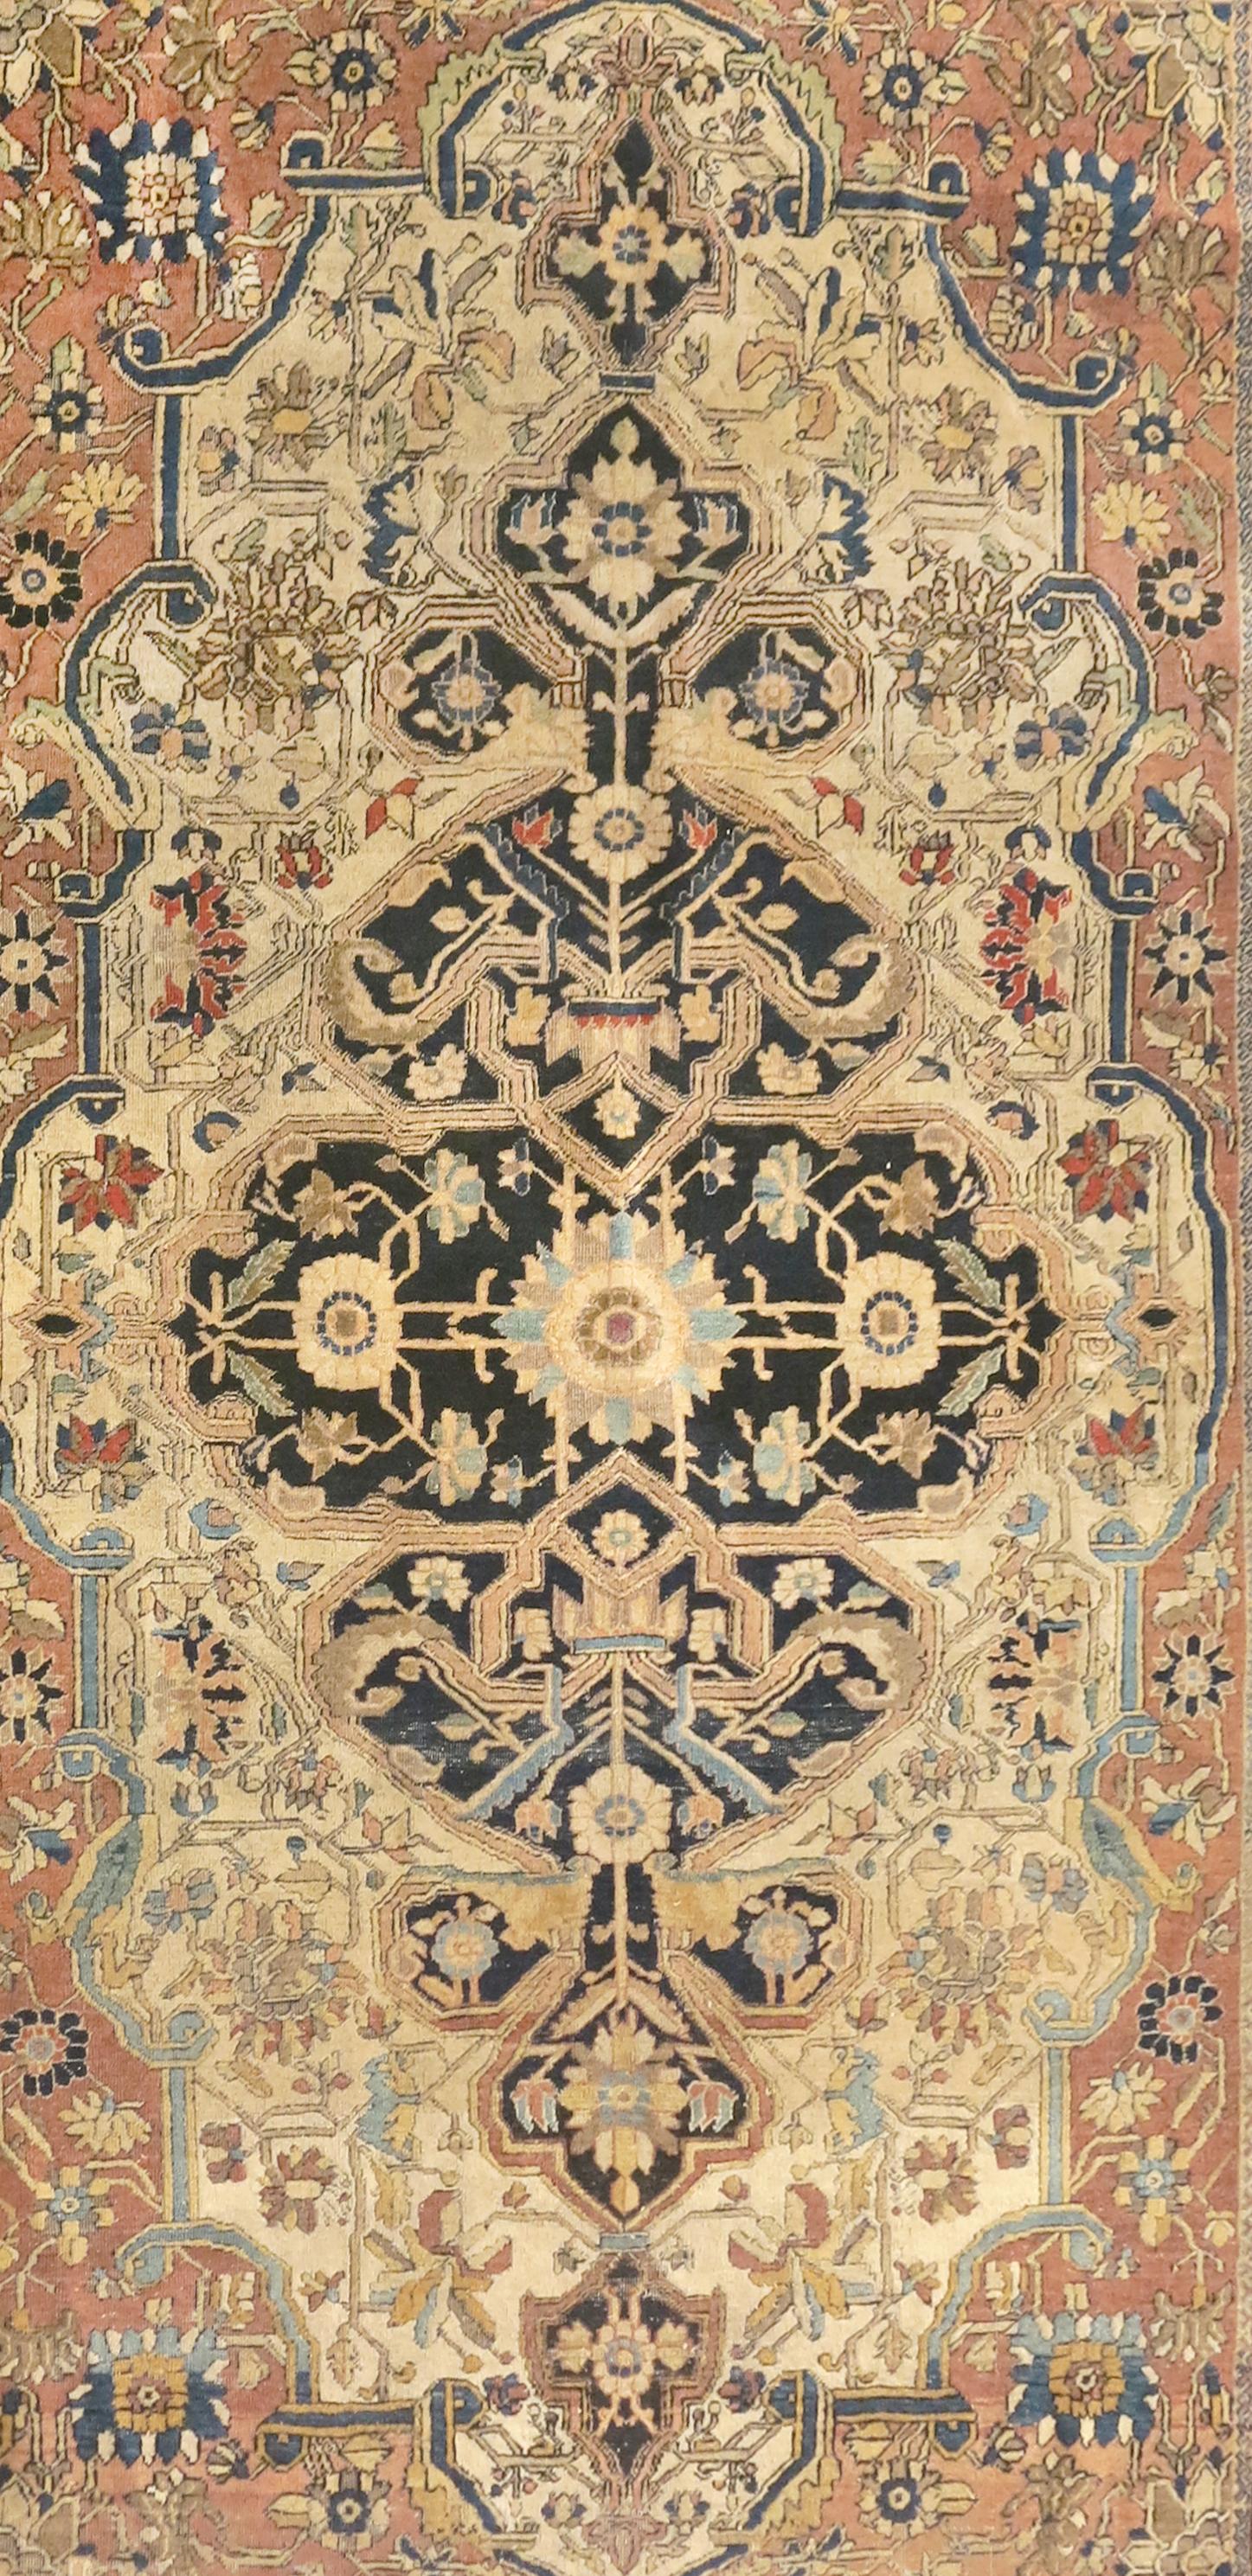 Fine antique Persian Mohtasham Kashan rug, hand knotted, circa 1890

Design: Central Medalion

Antique Kashan carpets are among the finest Persian rugs. They are woven in workshops of the city of Kashan, in north central Iran. Kashan was a hub